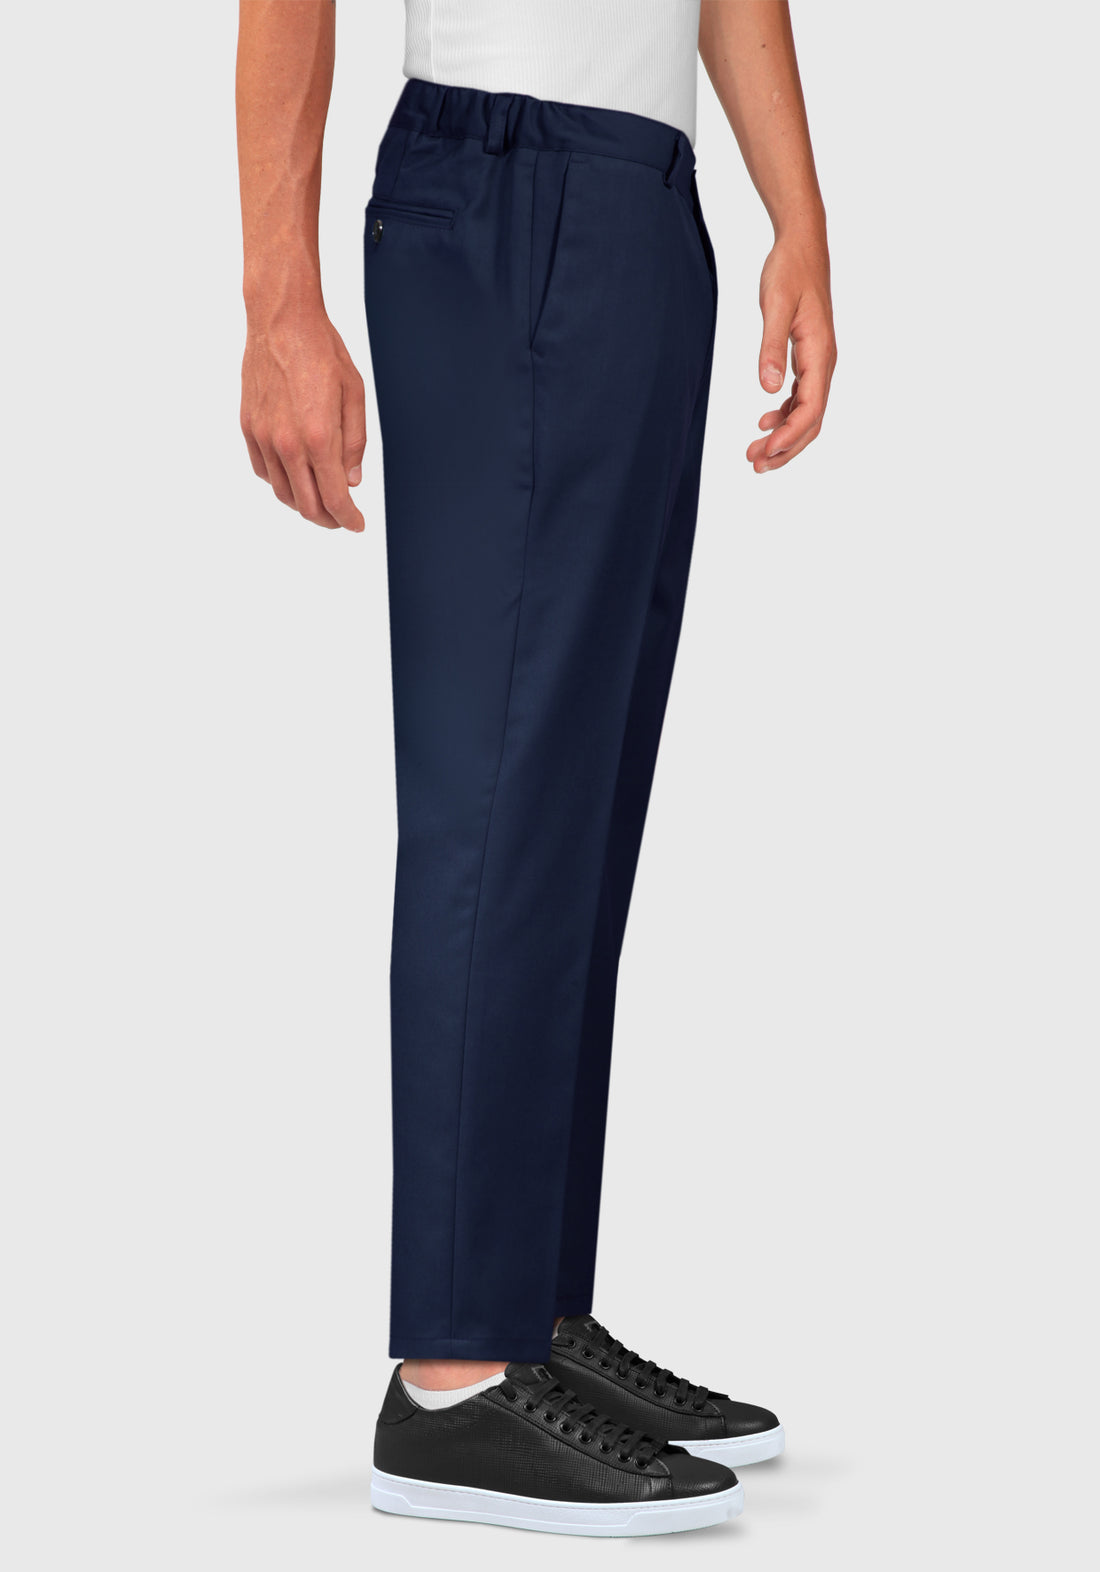 Half-breasted trousers dress with side elastics - Navy Blue